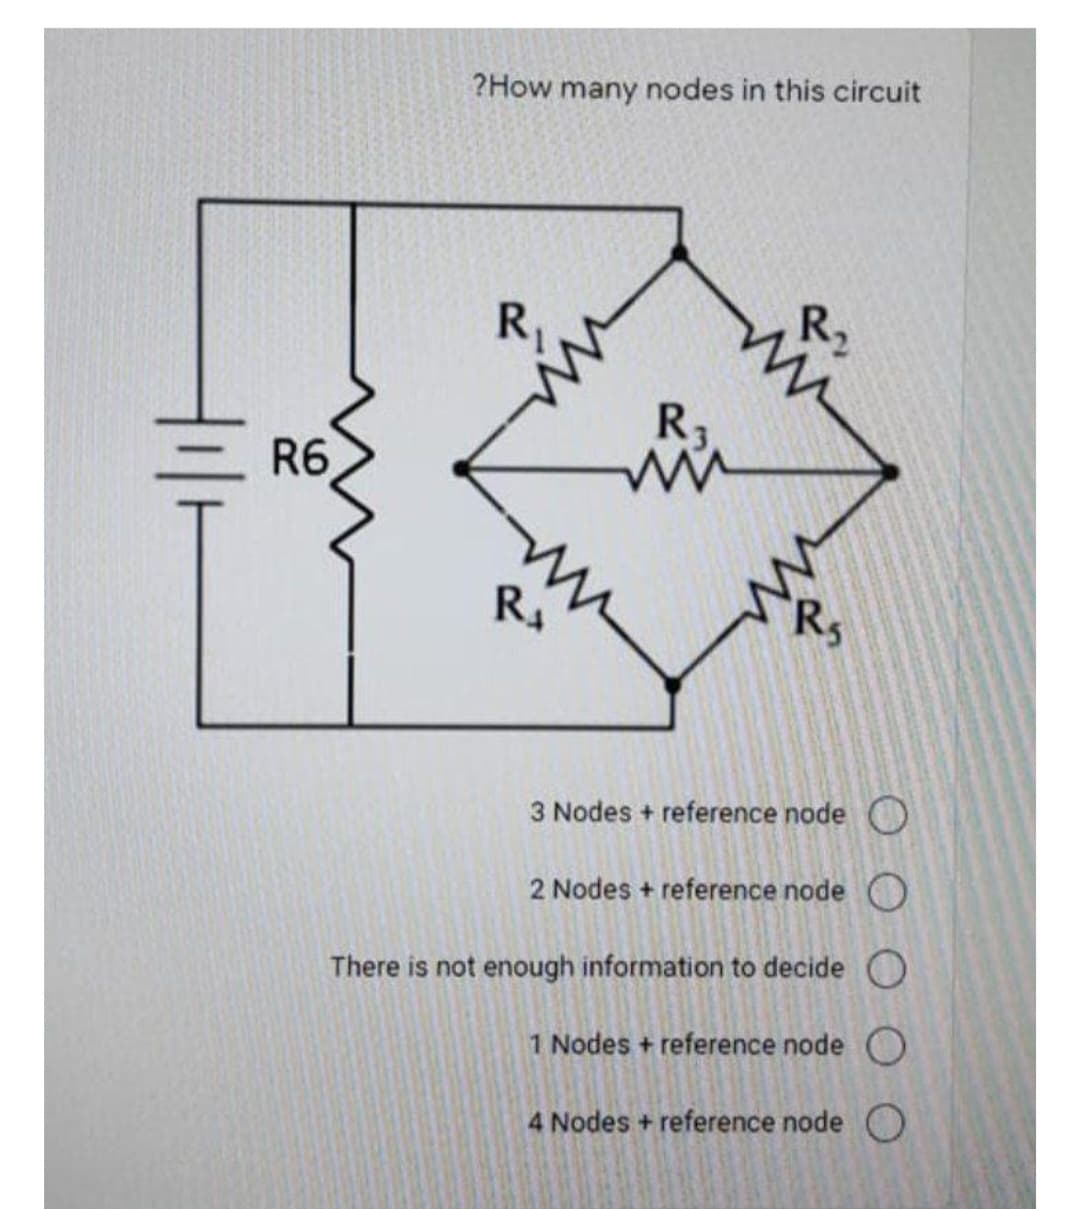 R6
?How many nodes in this circuit
R₁
R₁
3 Nodes + reference node
2 Nodes + reference node O
There is not enough information to decide O
1 Nodes + reference node O
4 Nodes + reference node O